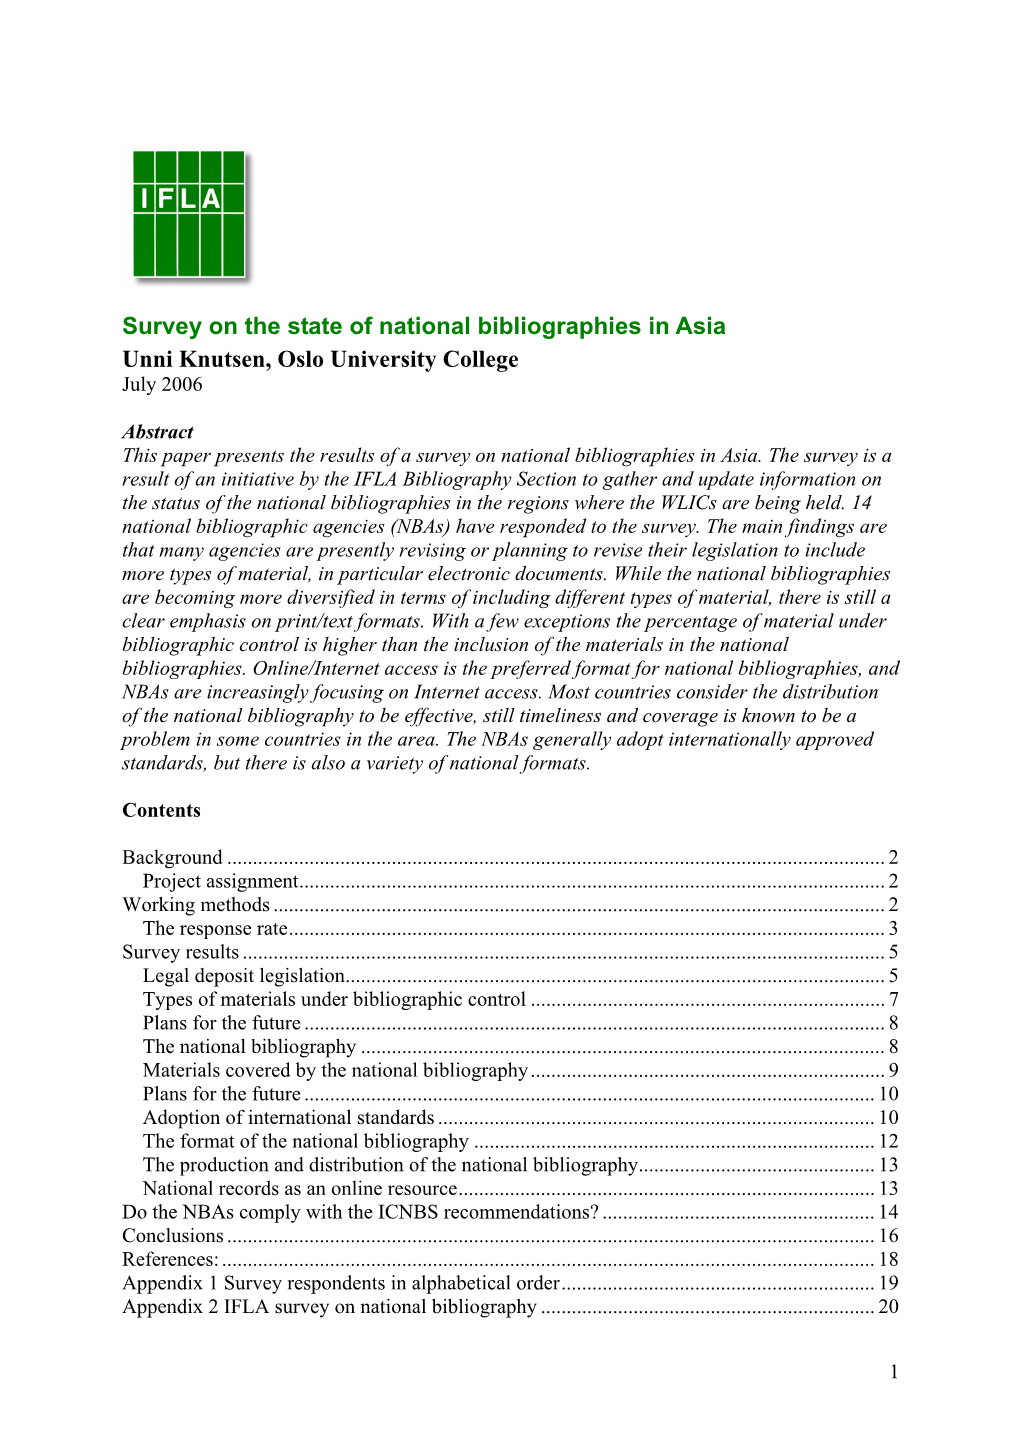 Survey on the State of National Bibliographies in Asia Unni Knutsen, Oslo University College July 2006